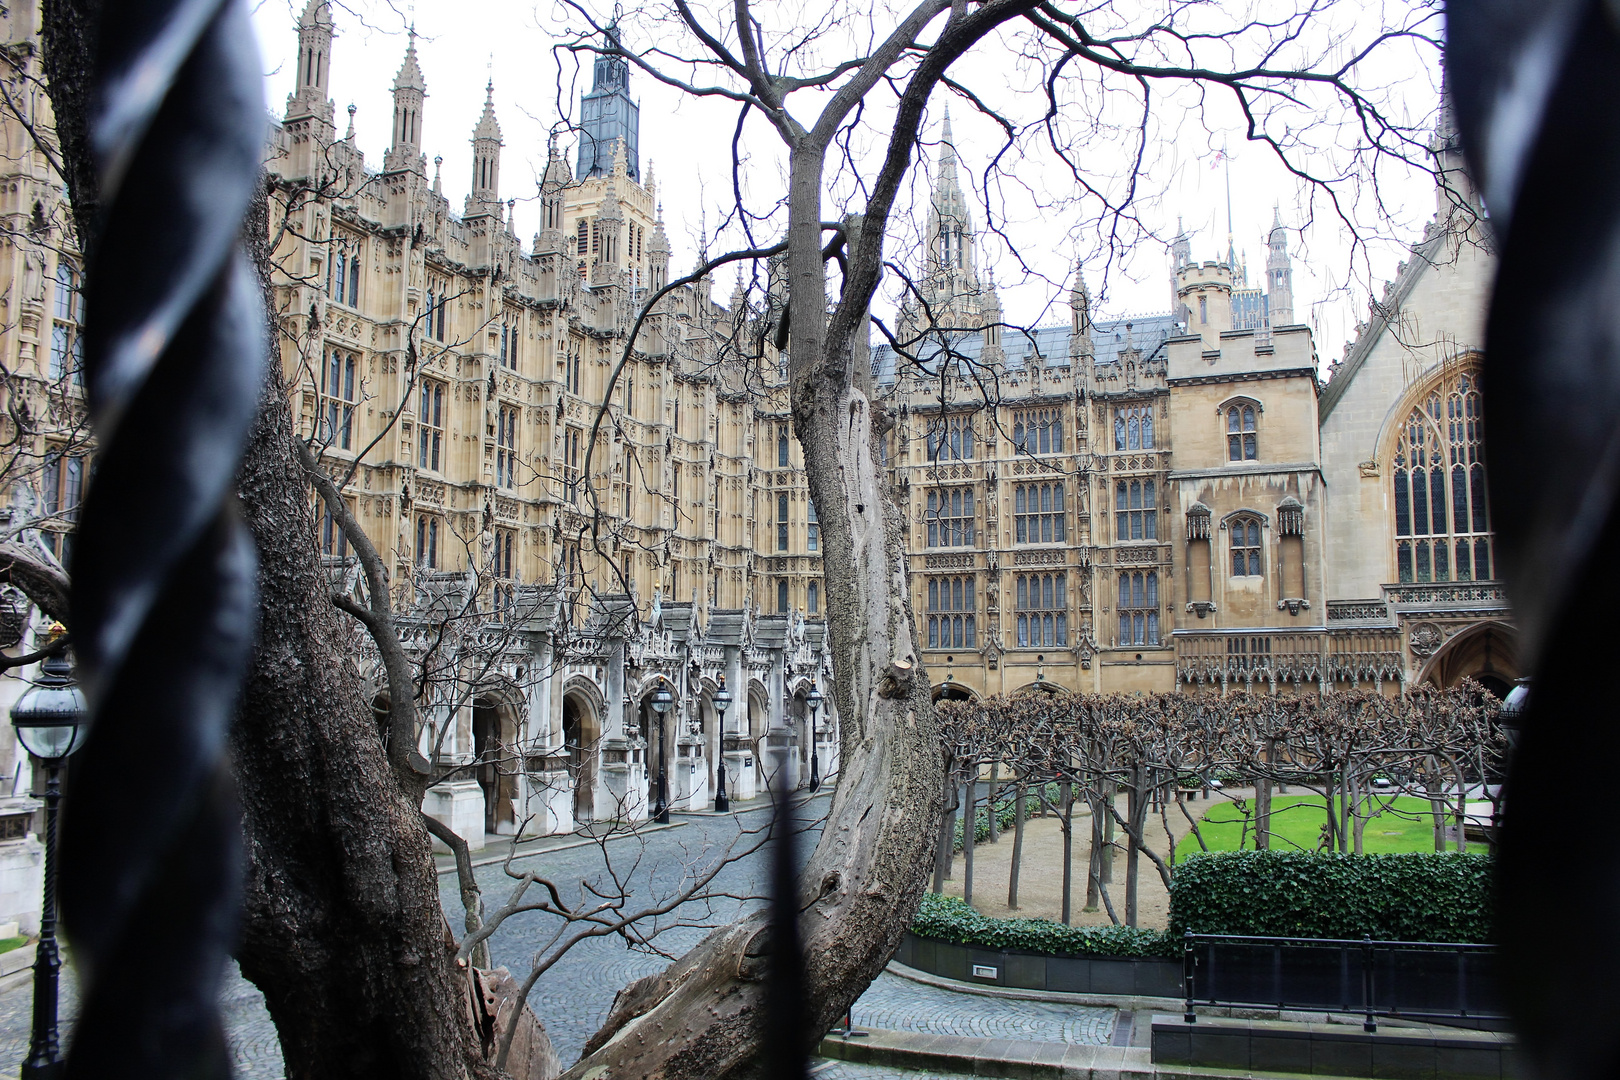 House of Parlament